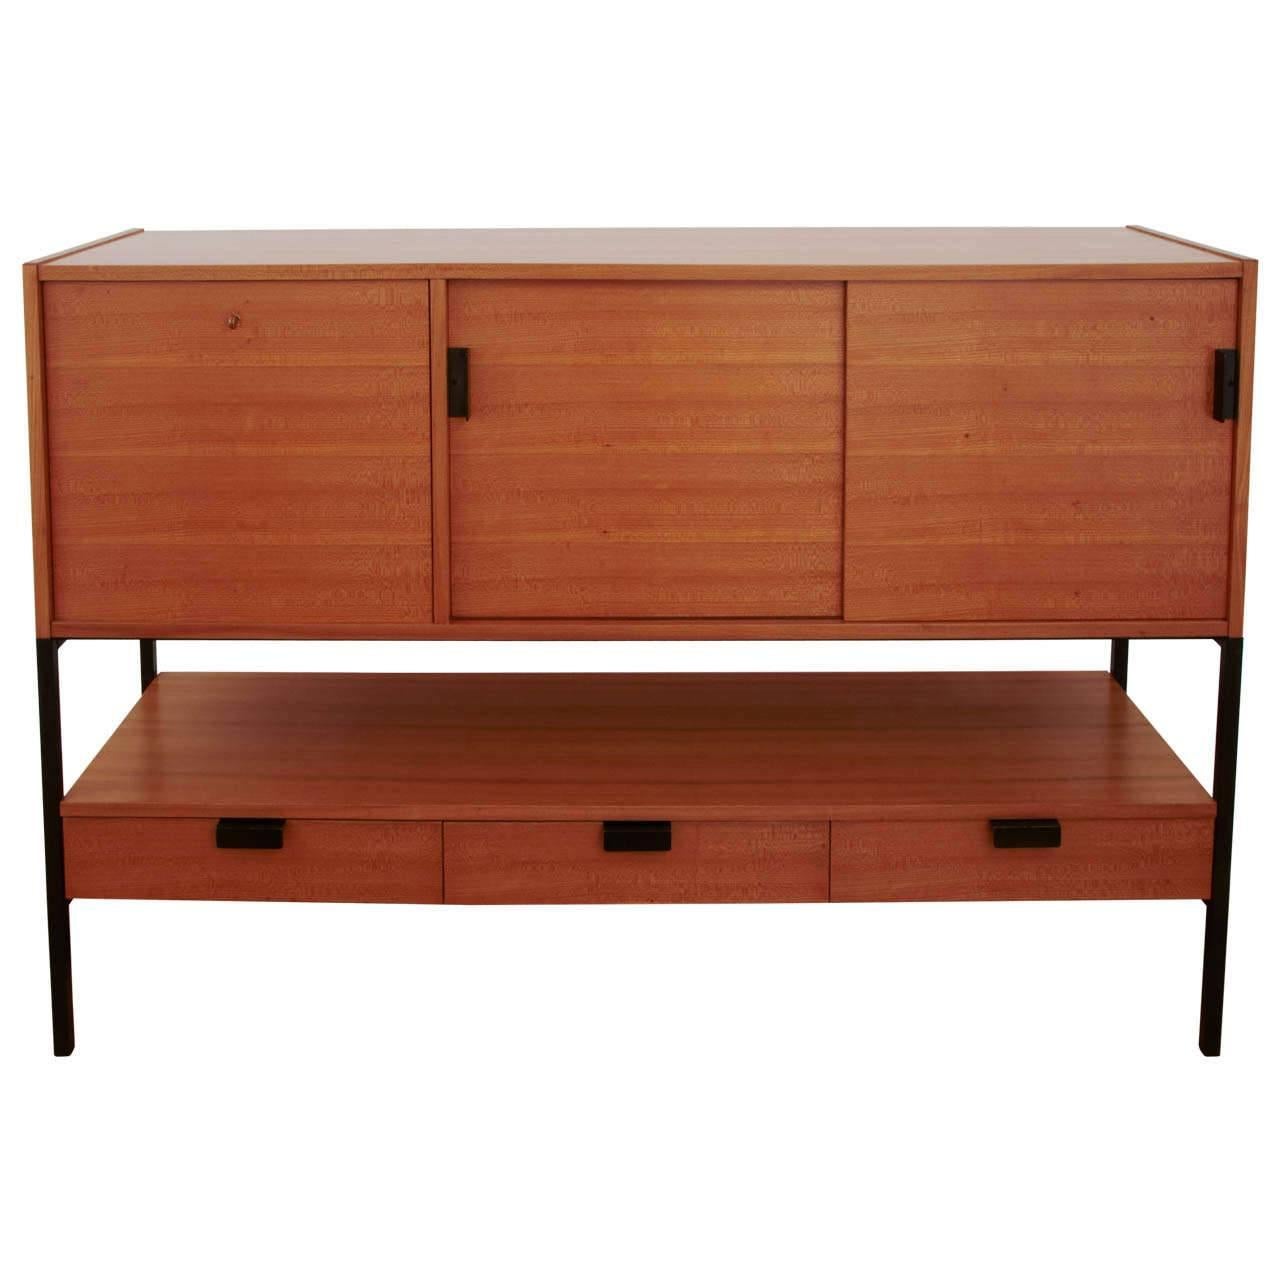 Sideboard by André Simard, Meubles André Simard Edition, 1955 For Sale